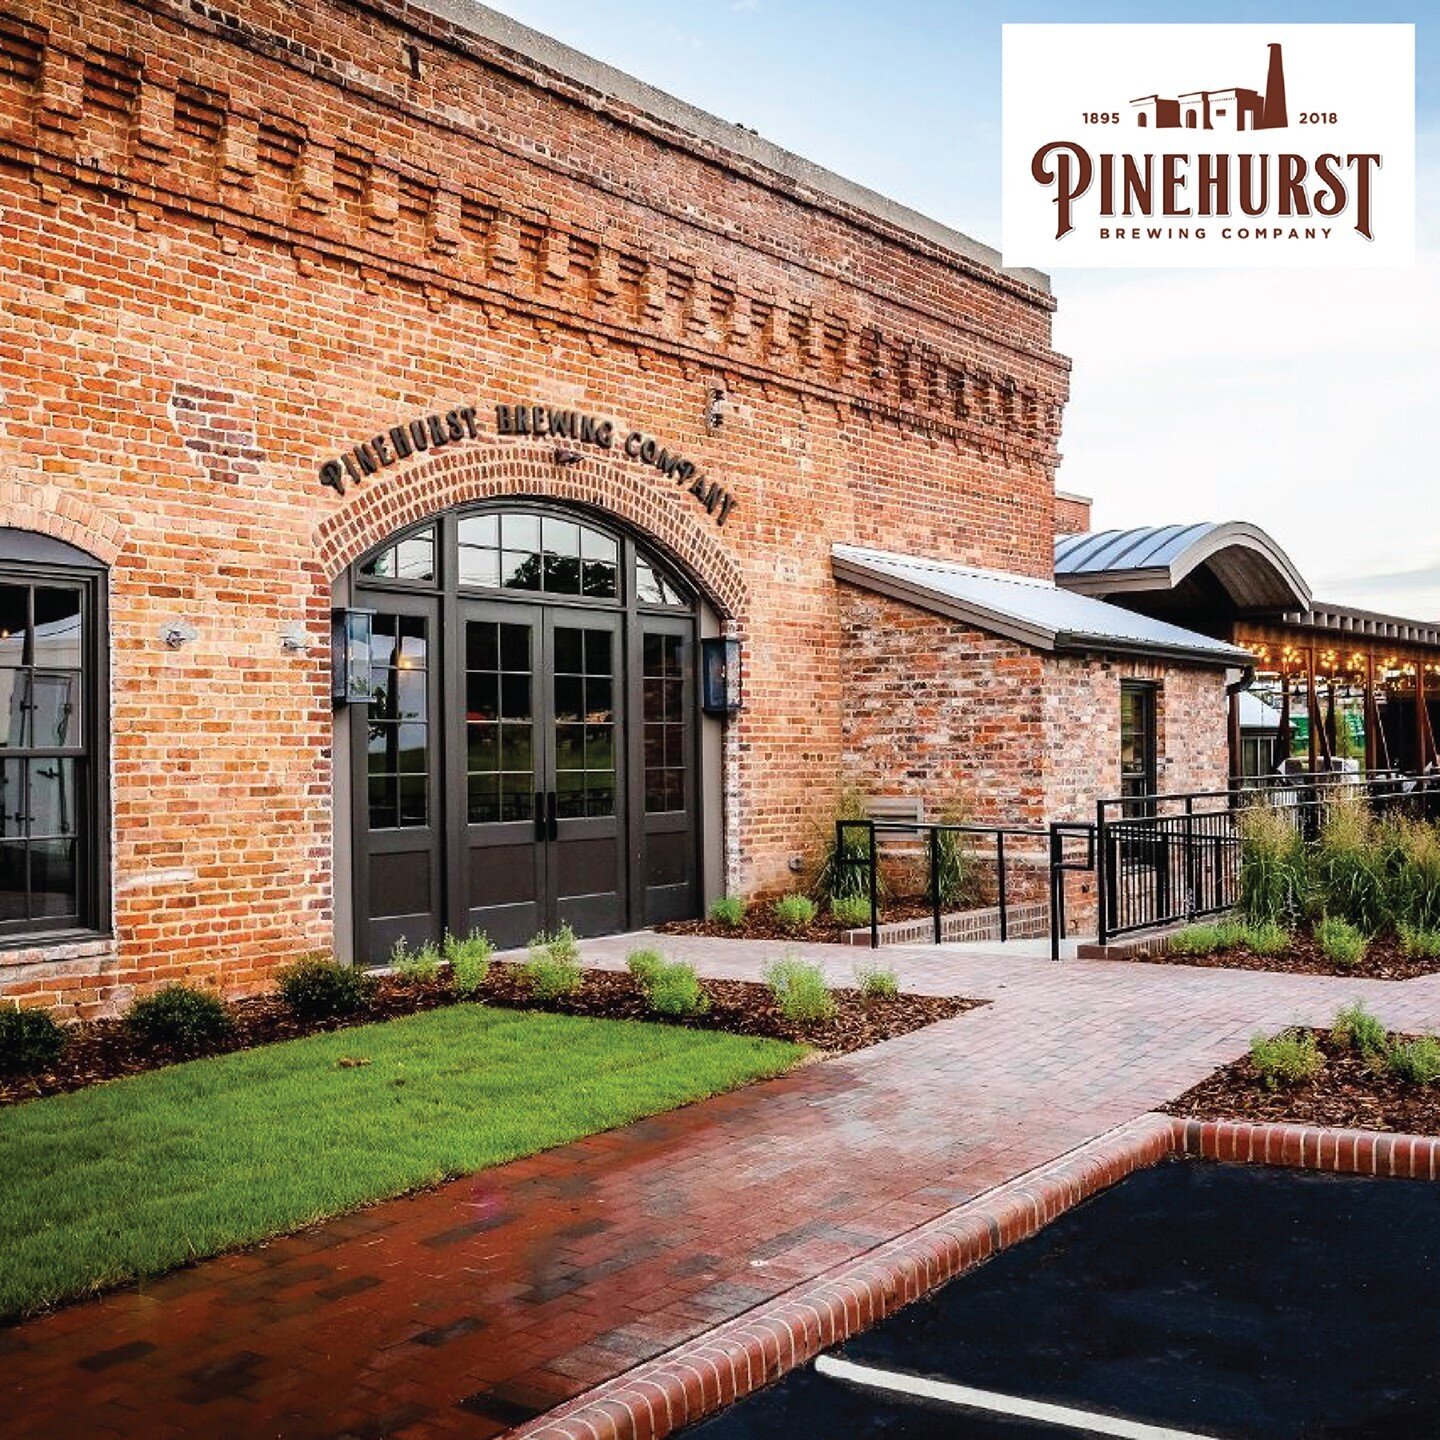 👏 EAT LOCAL! 👏
Pinehurst Brewing Company is located in Moore County and is housed in what was the original Village steam plant. They offer an array of craft beers, authentic North Carolina barbecue, Texas-style brisket, and more! 

Enjoy take out a